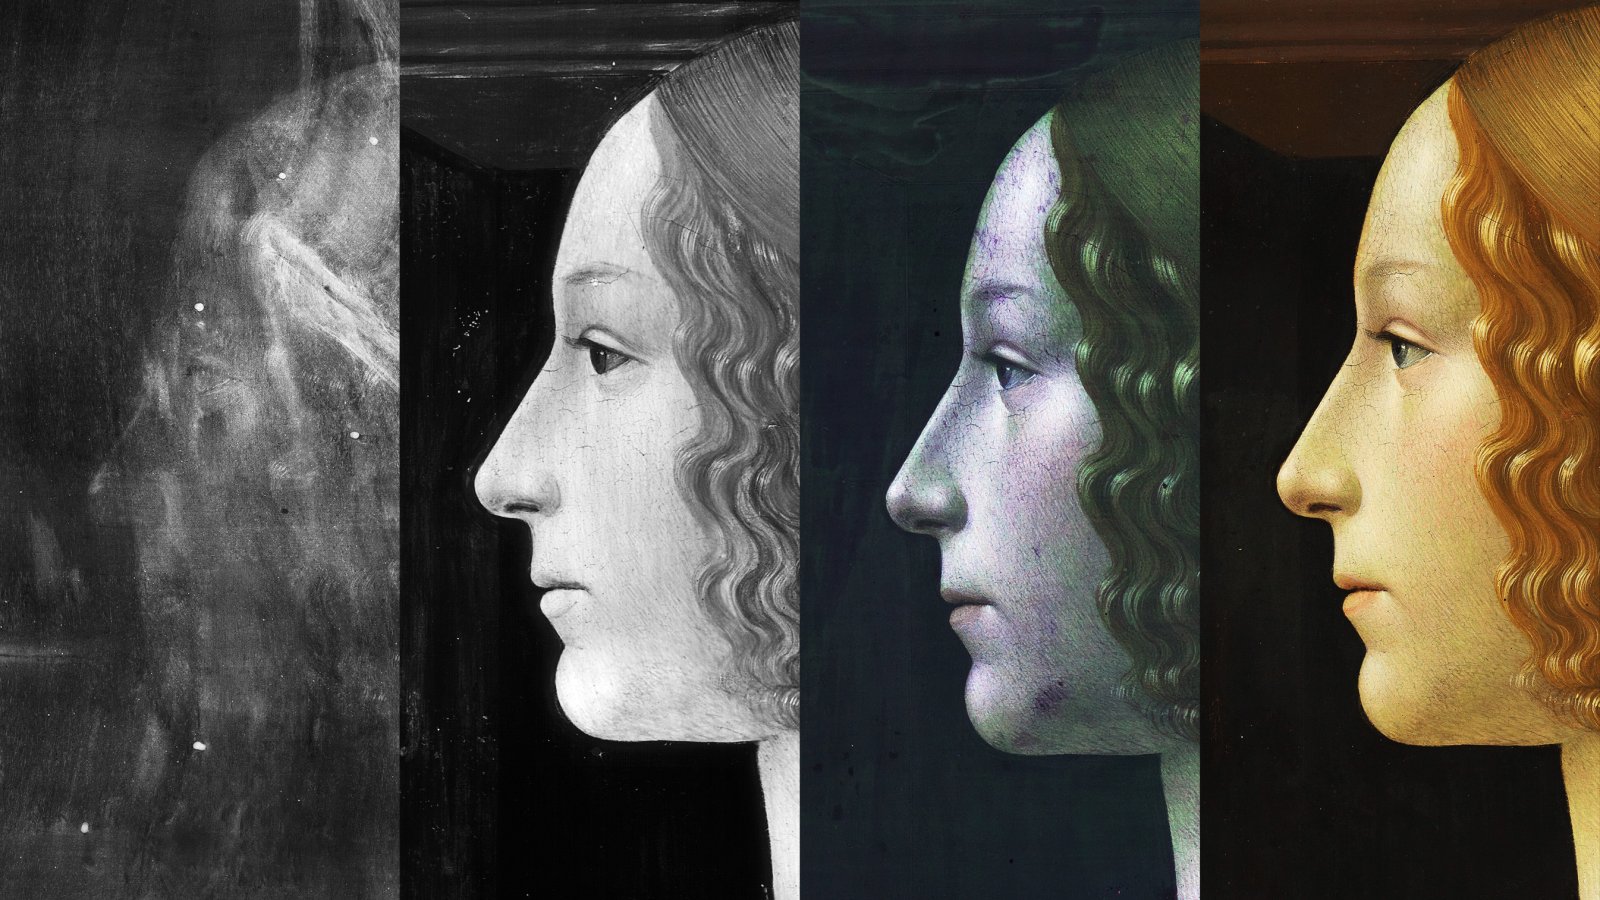 Composition of technical images for the study of Ghirlandaio's work “Portrait of Giovanna degli Albizzi Tornabuoni”.